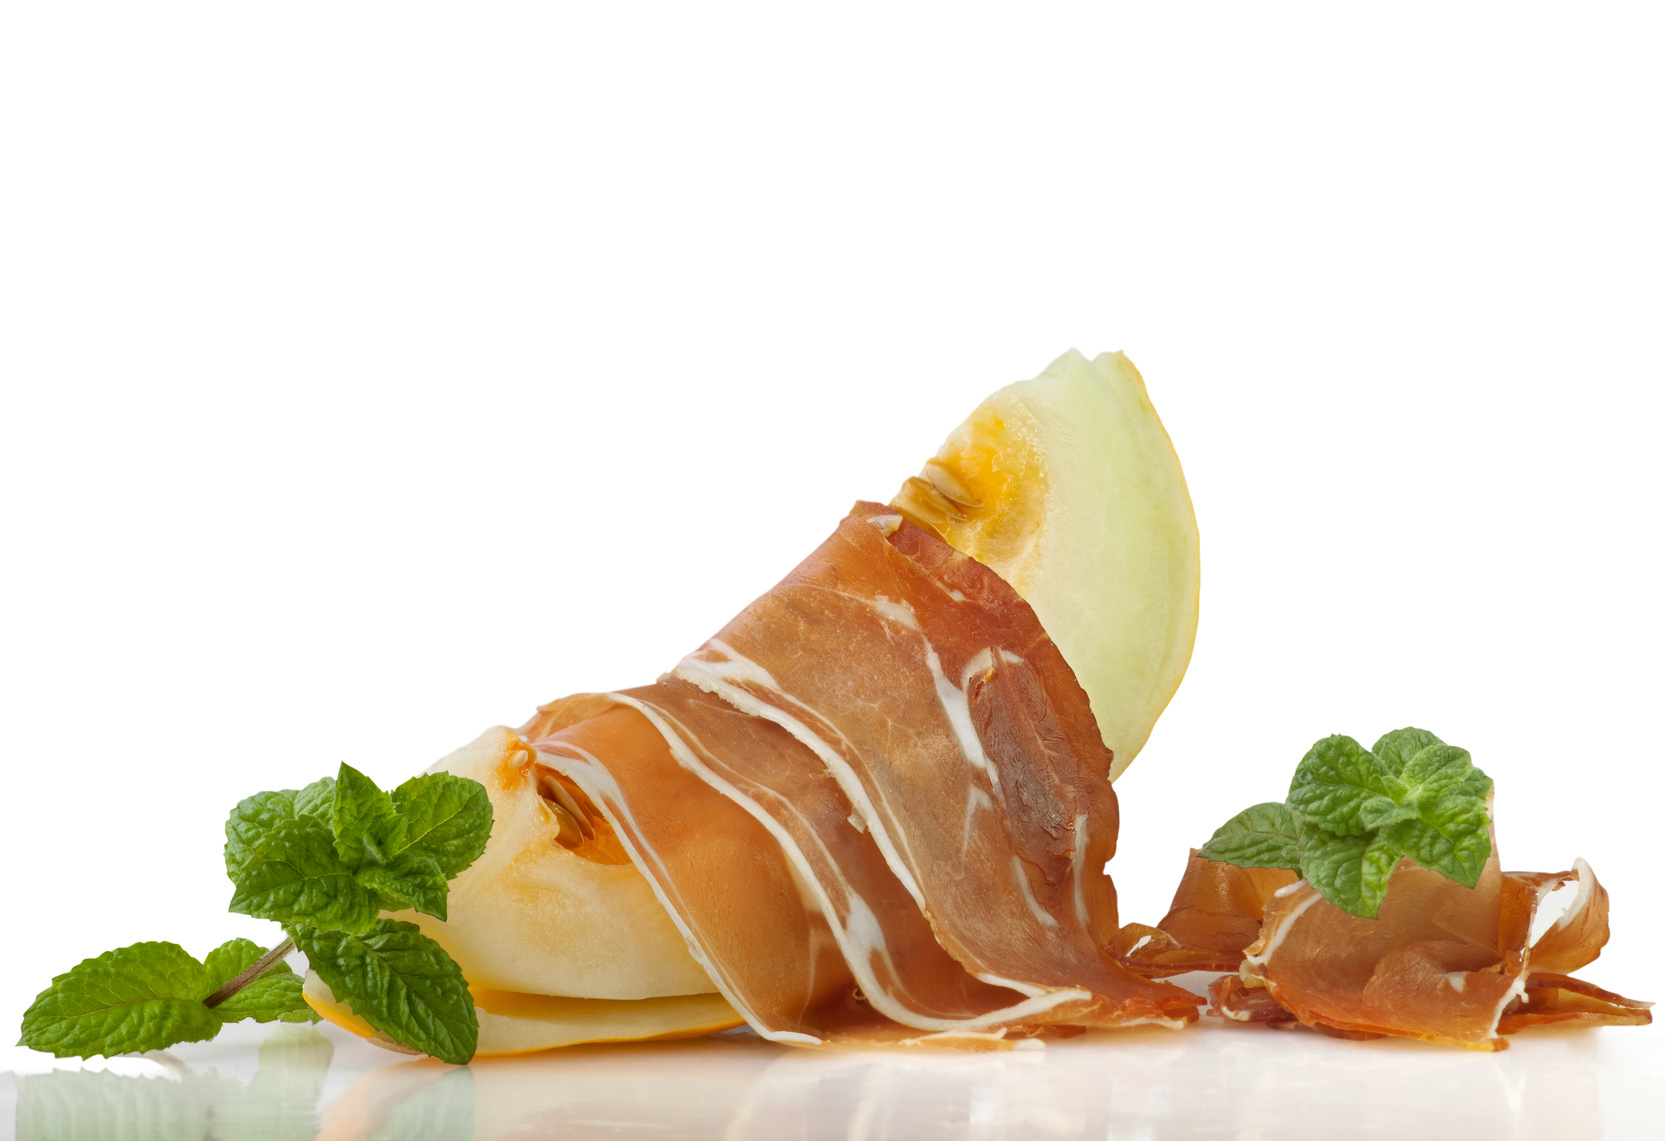  Peppermint, melon, cured ham of some sort and oil/seasoning to taste, delicious!&nbsp; 